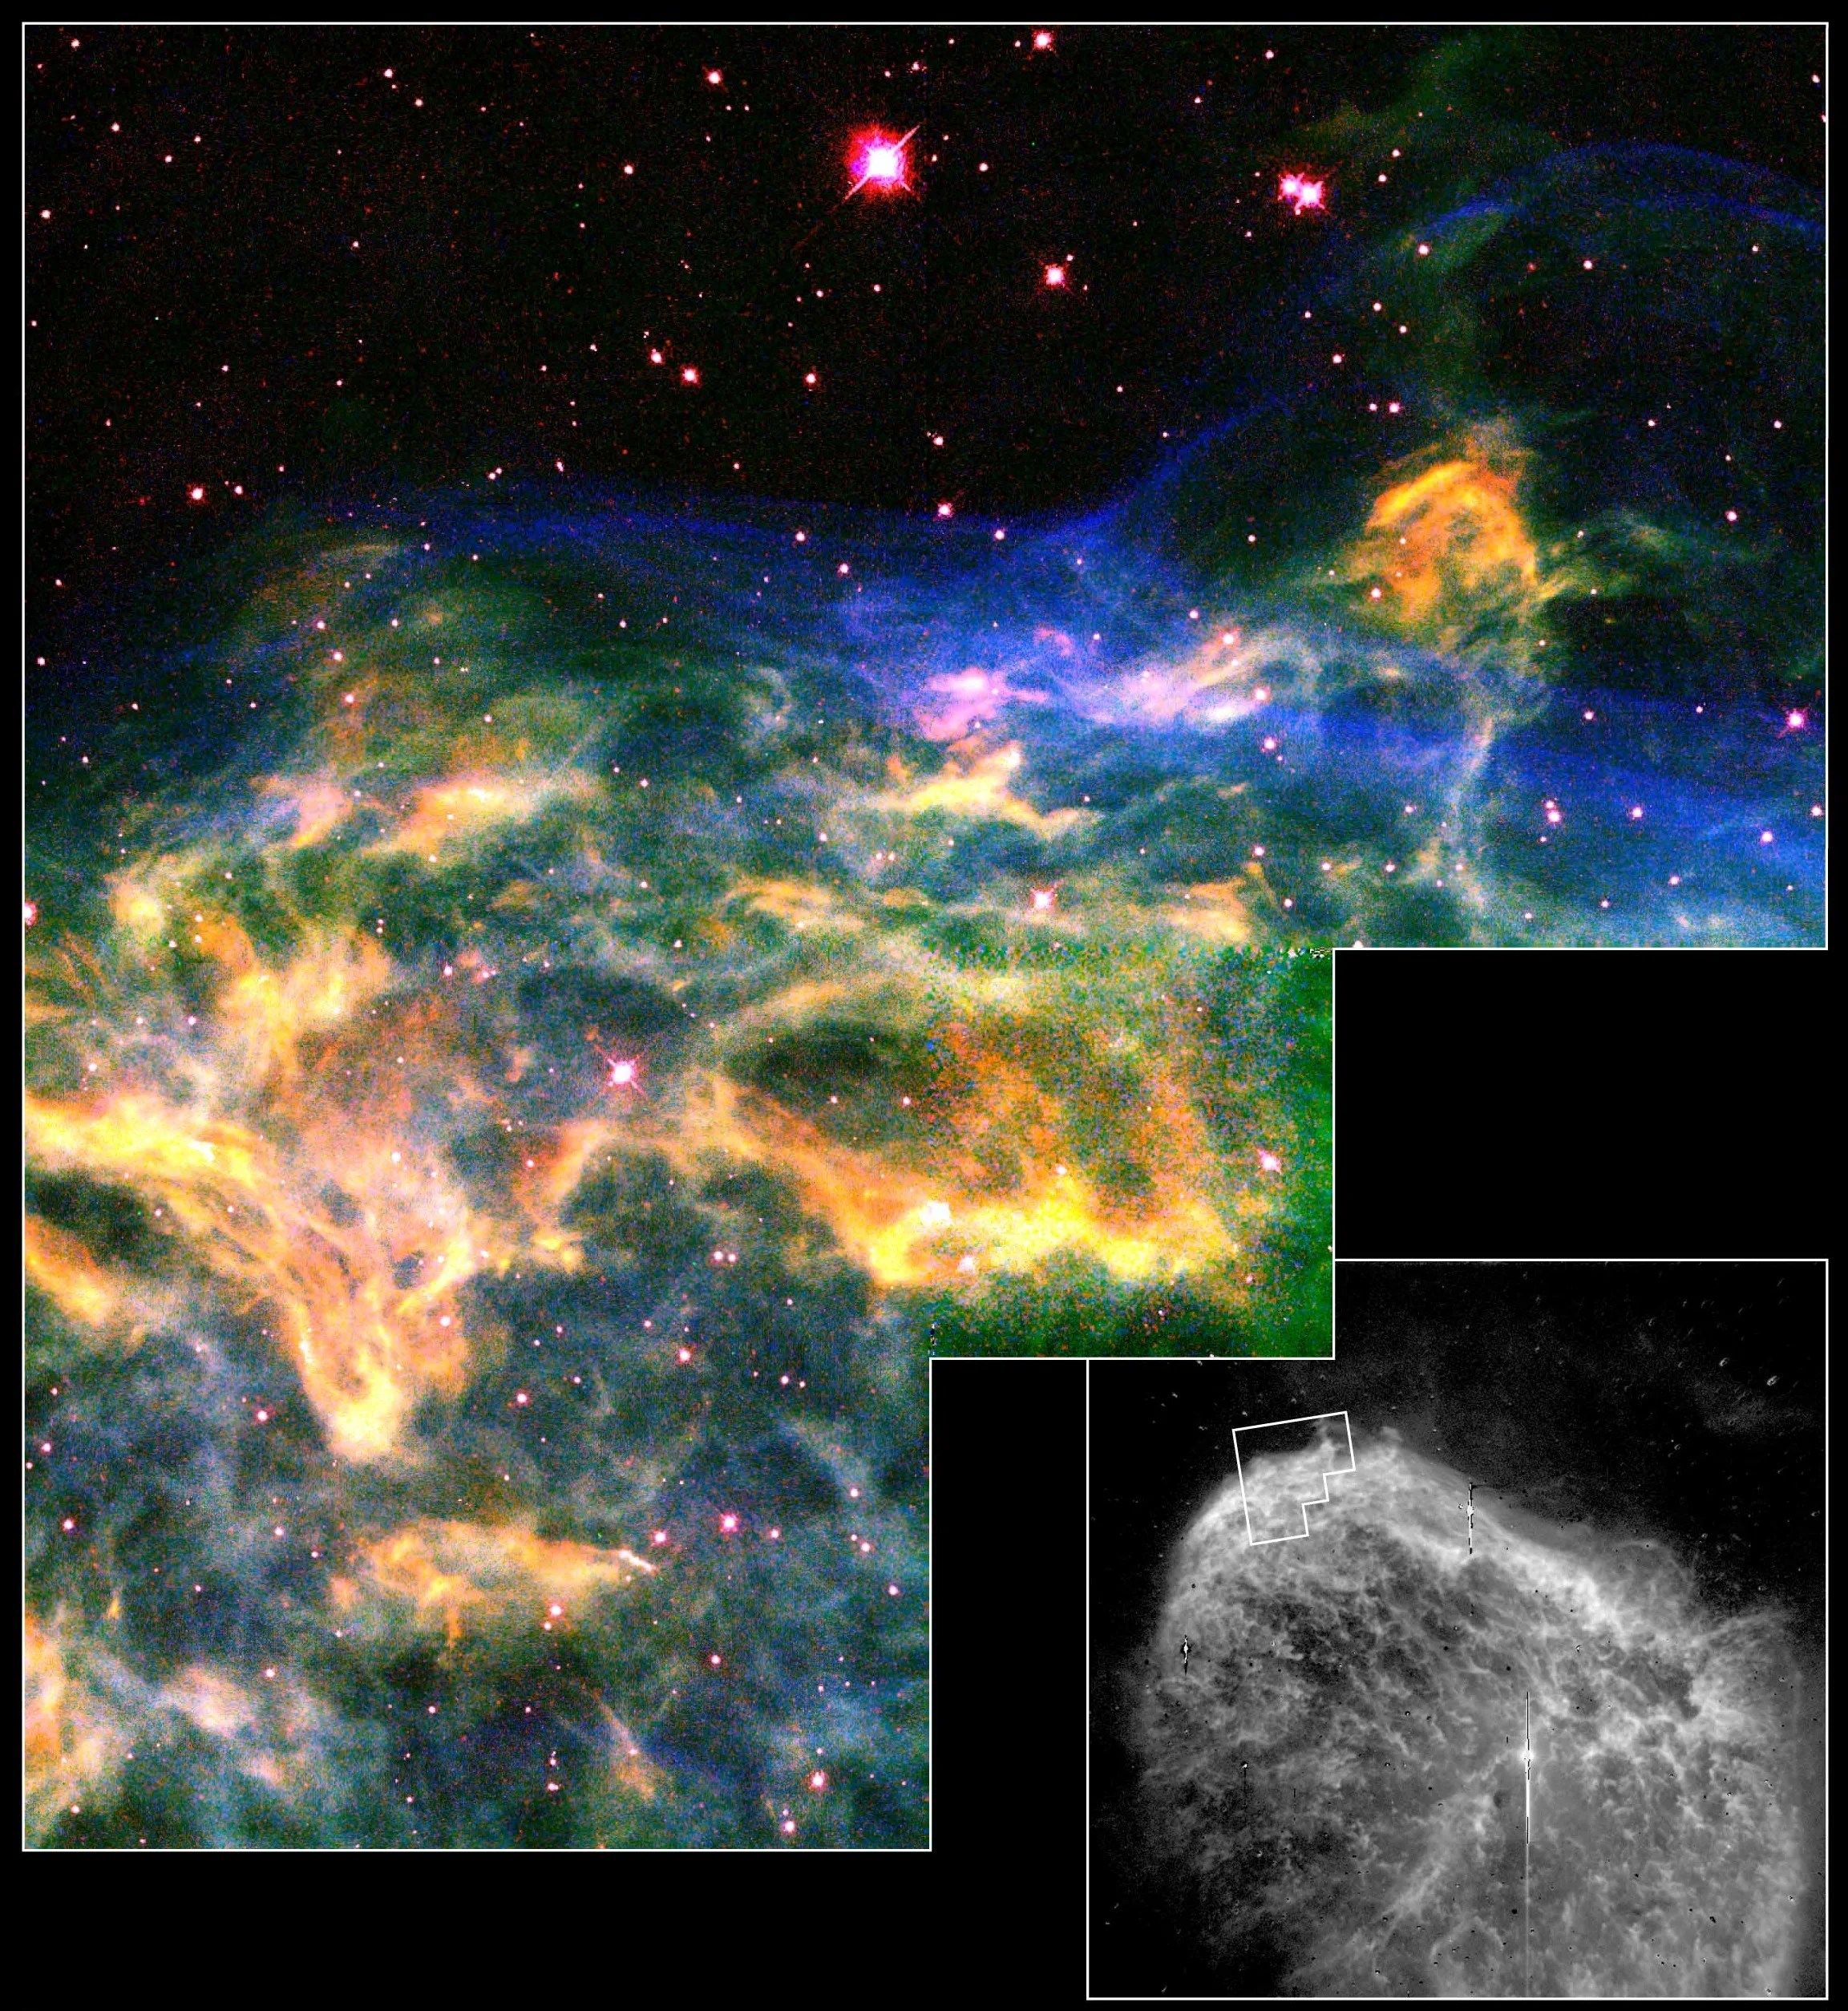 colorful streams of yellow, blue, and green gas and dust extend from the lower left to the center right. At the bottom right is a black and white image from a ground based telescope.